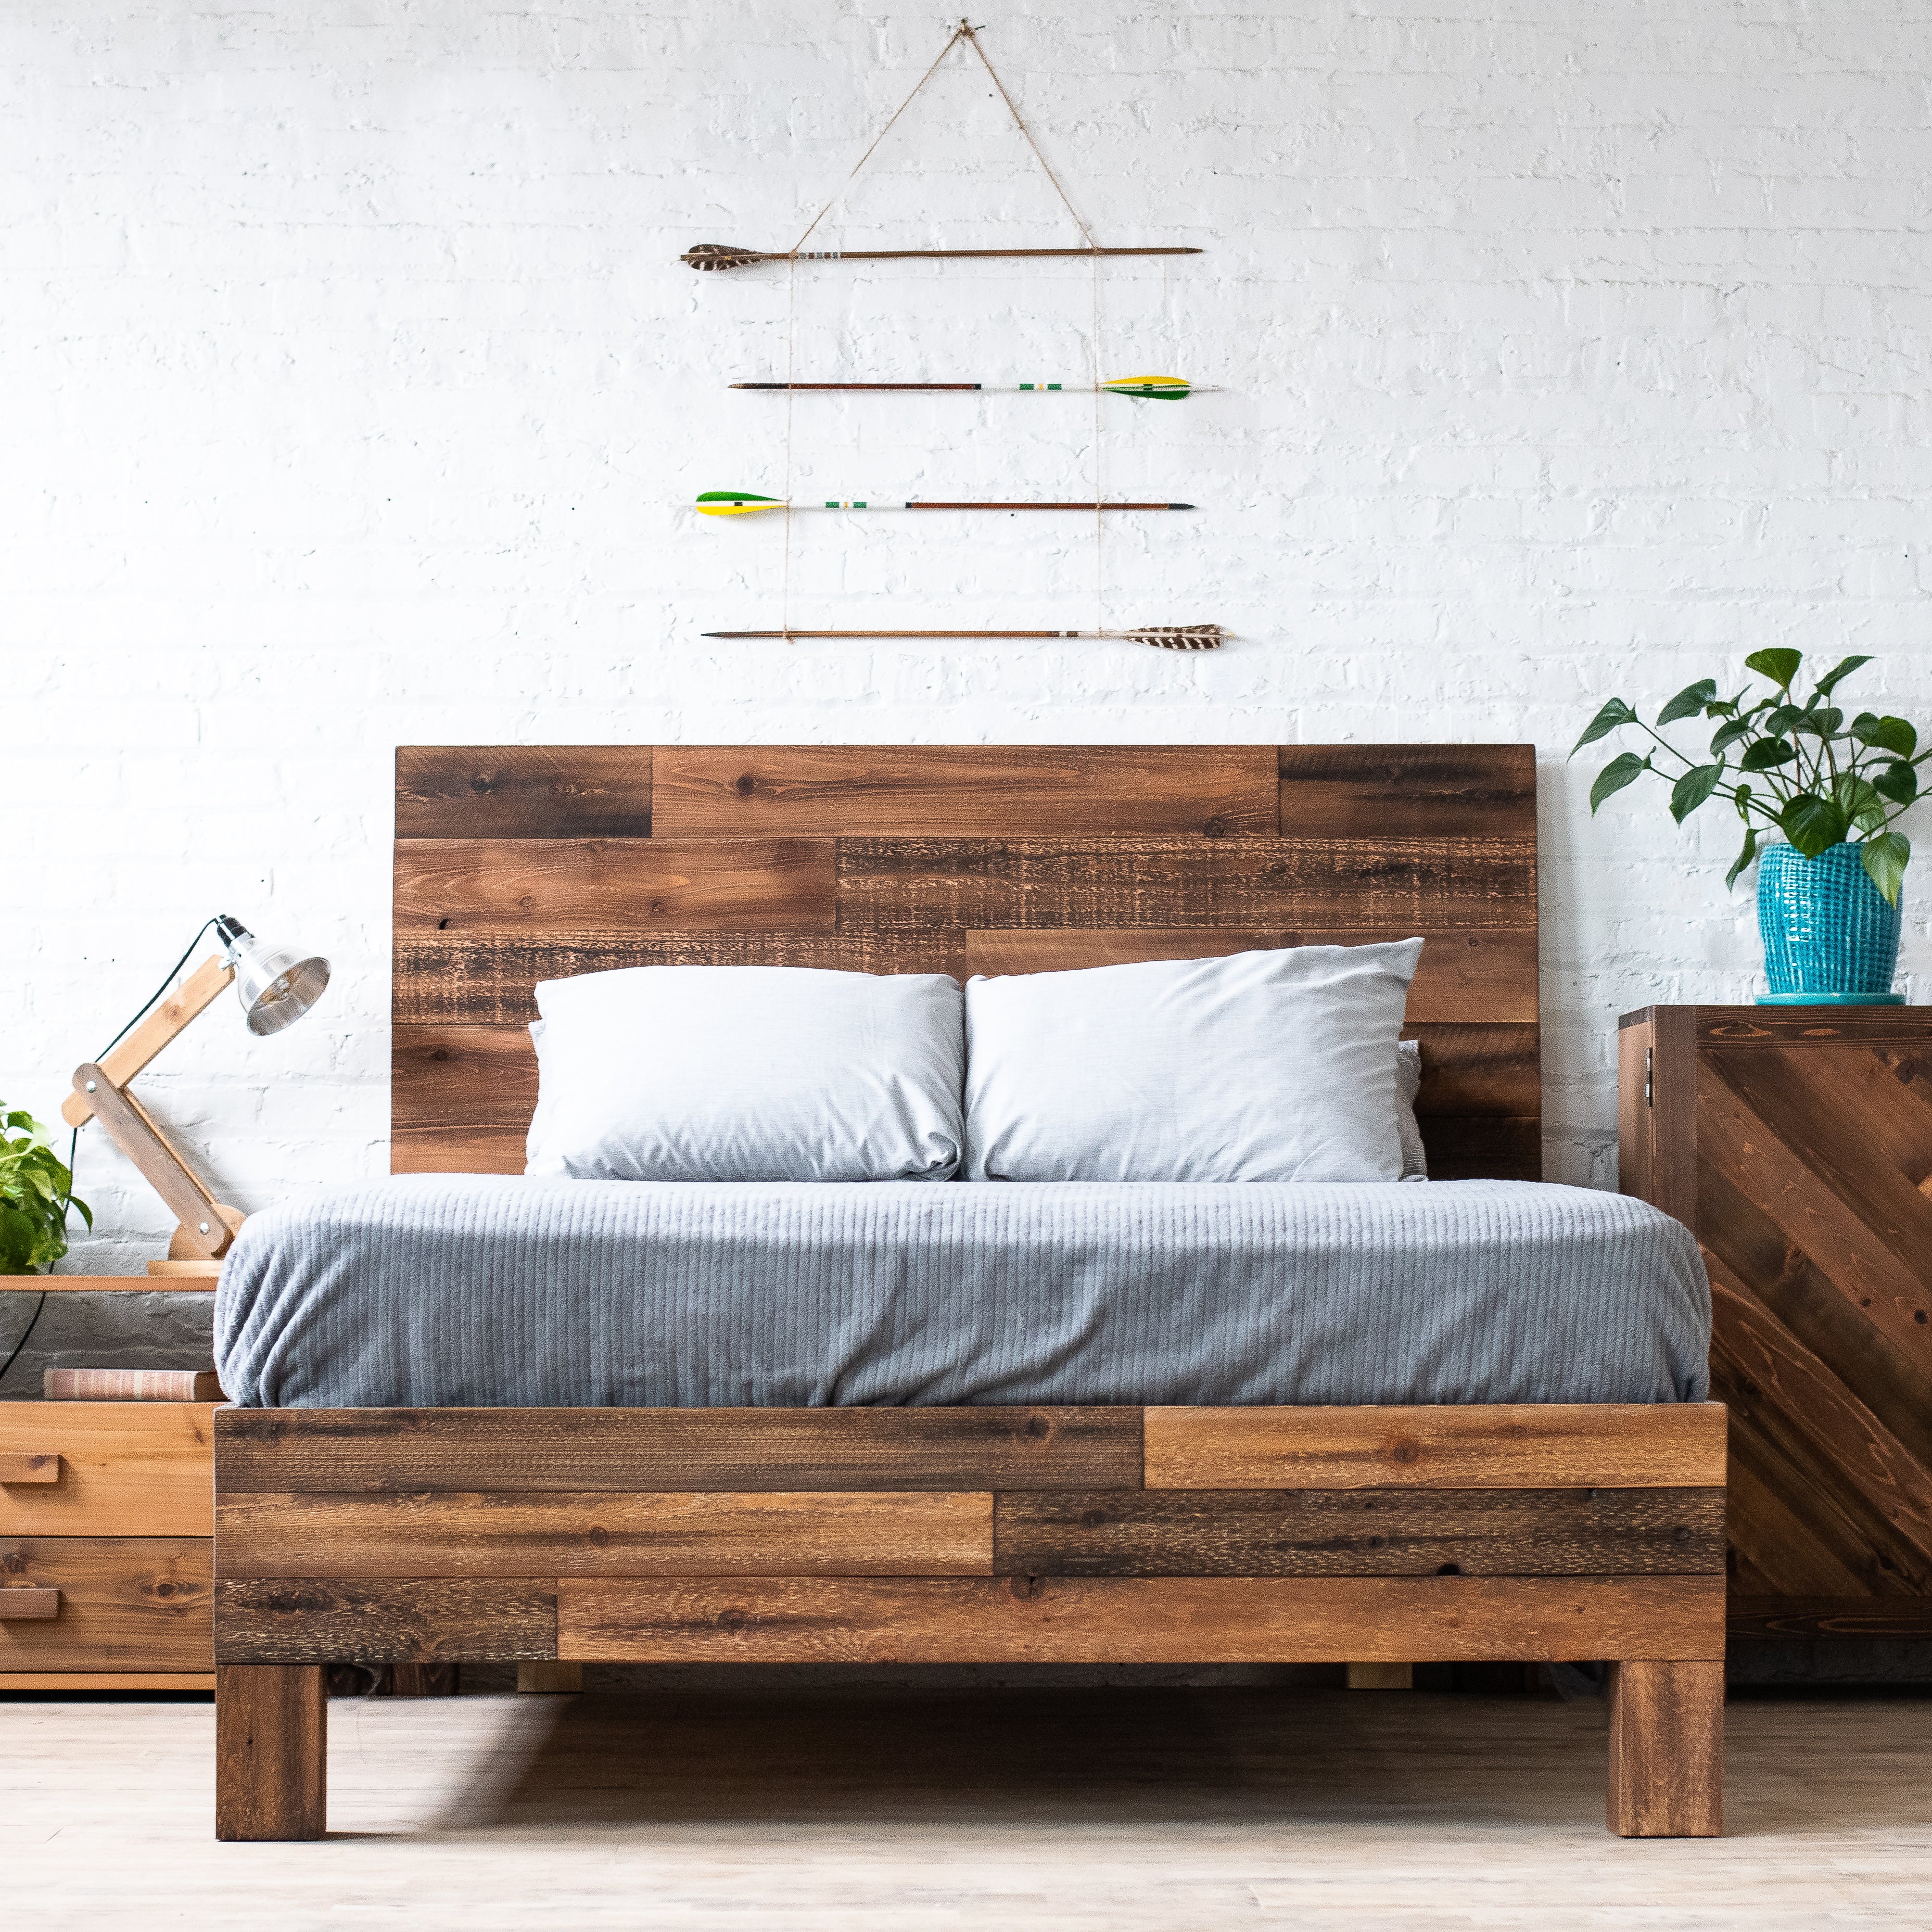 The Homestead Bed Rustic Barnwood Reclaimed Bed Repurposed Timber Urban Billy